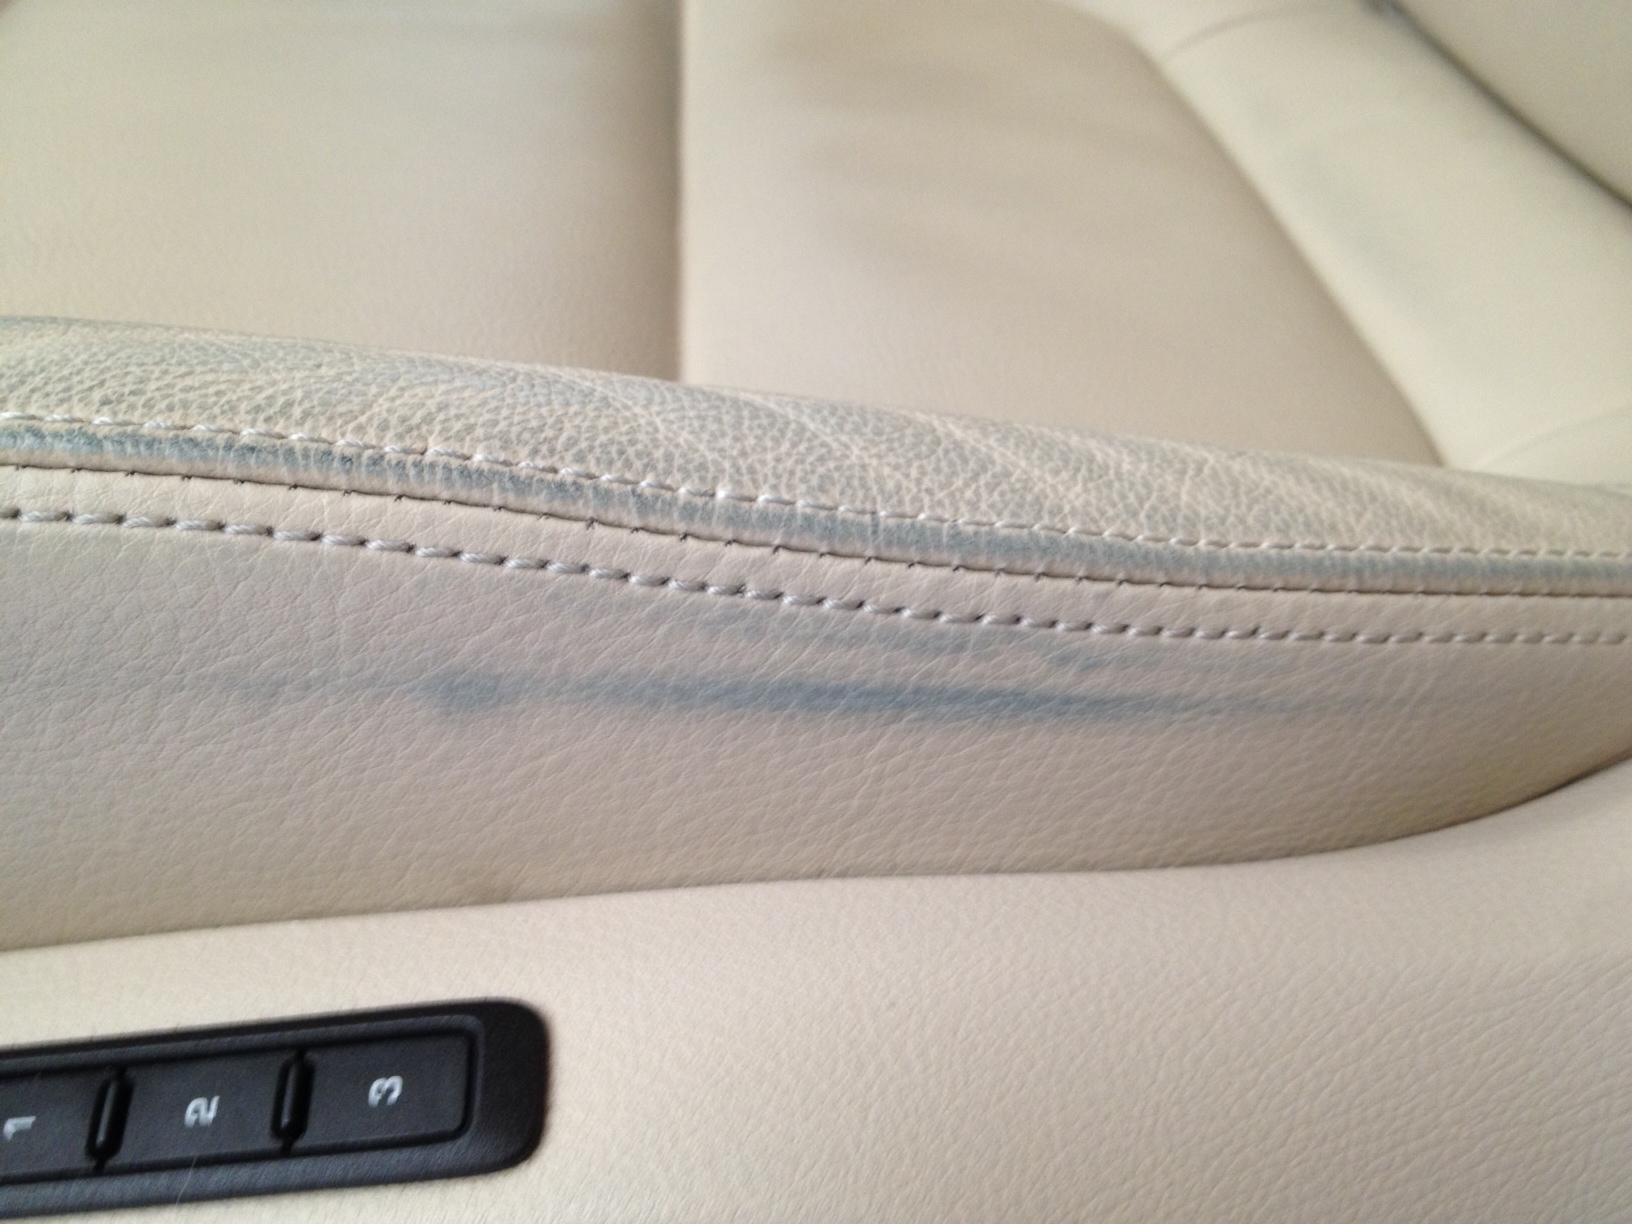 Blue Jean Dye Transfer Stains, How To Remove Blue Jean Dye From Leather Car Seats